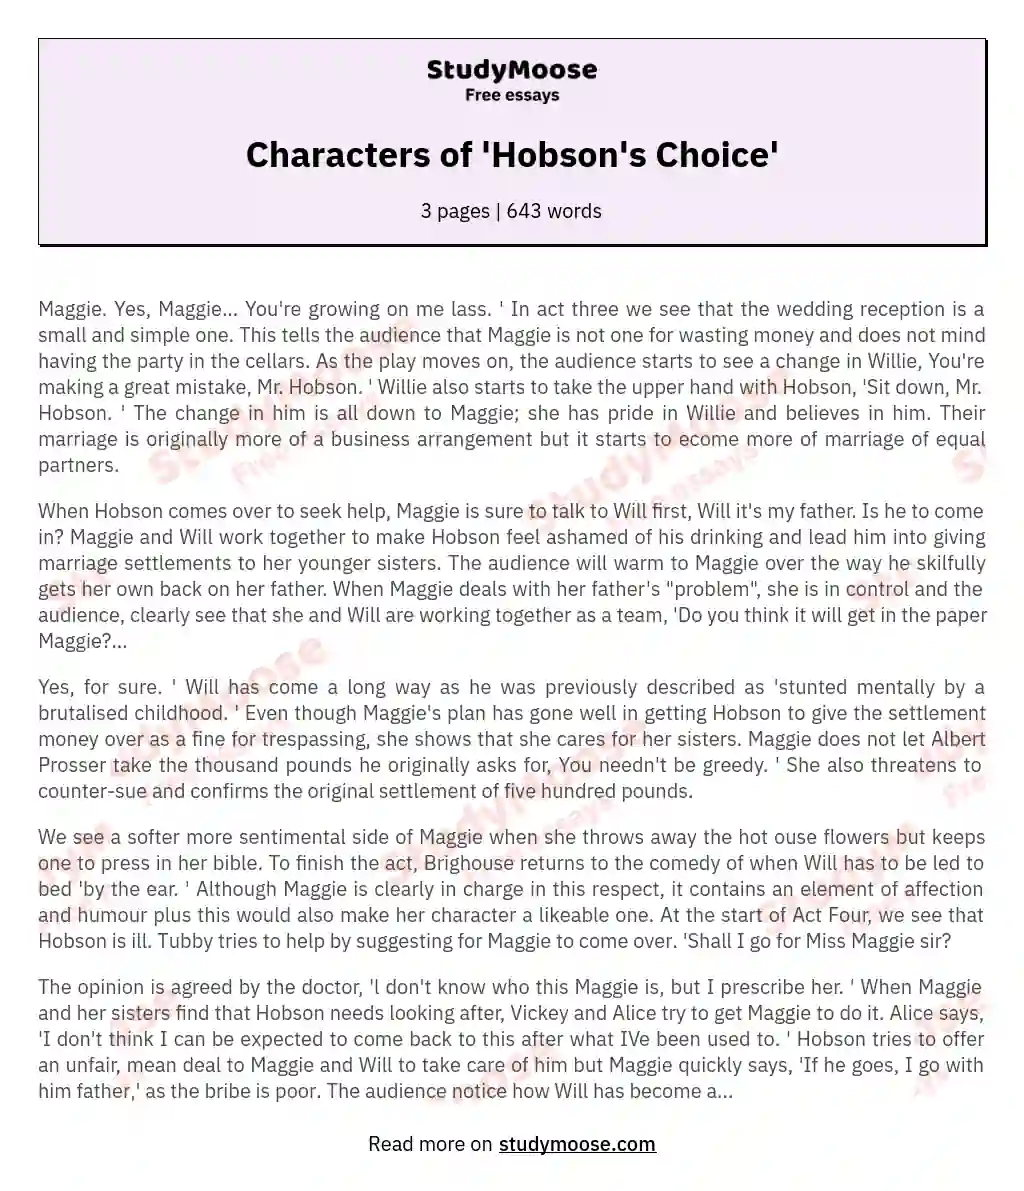 Characters of 'Hobson's Choice' essay